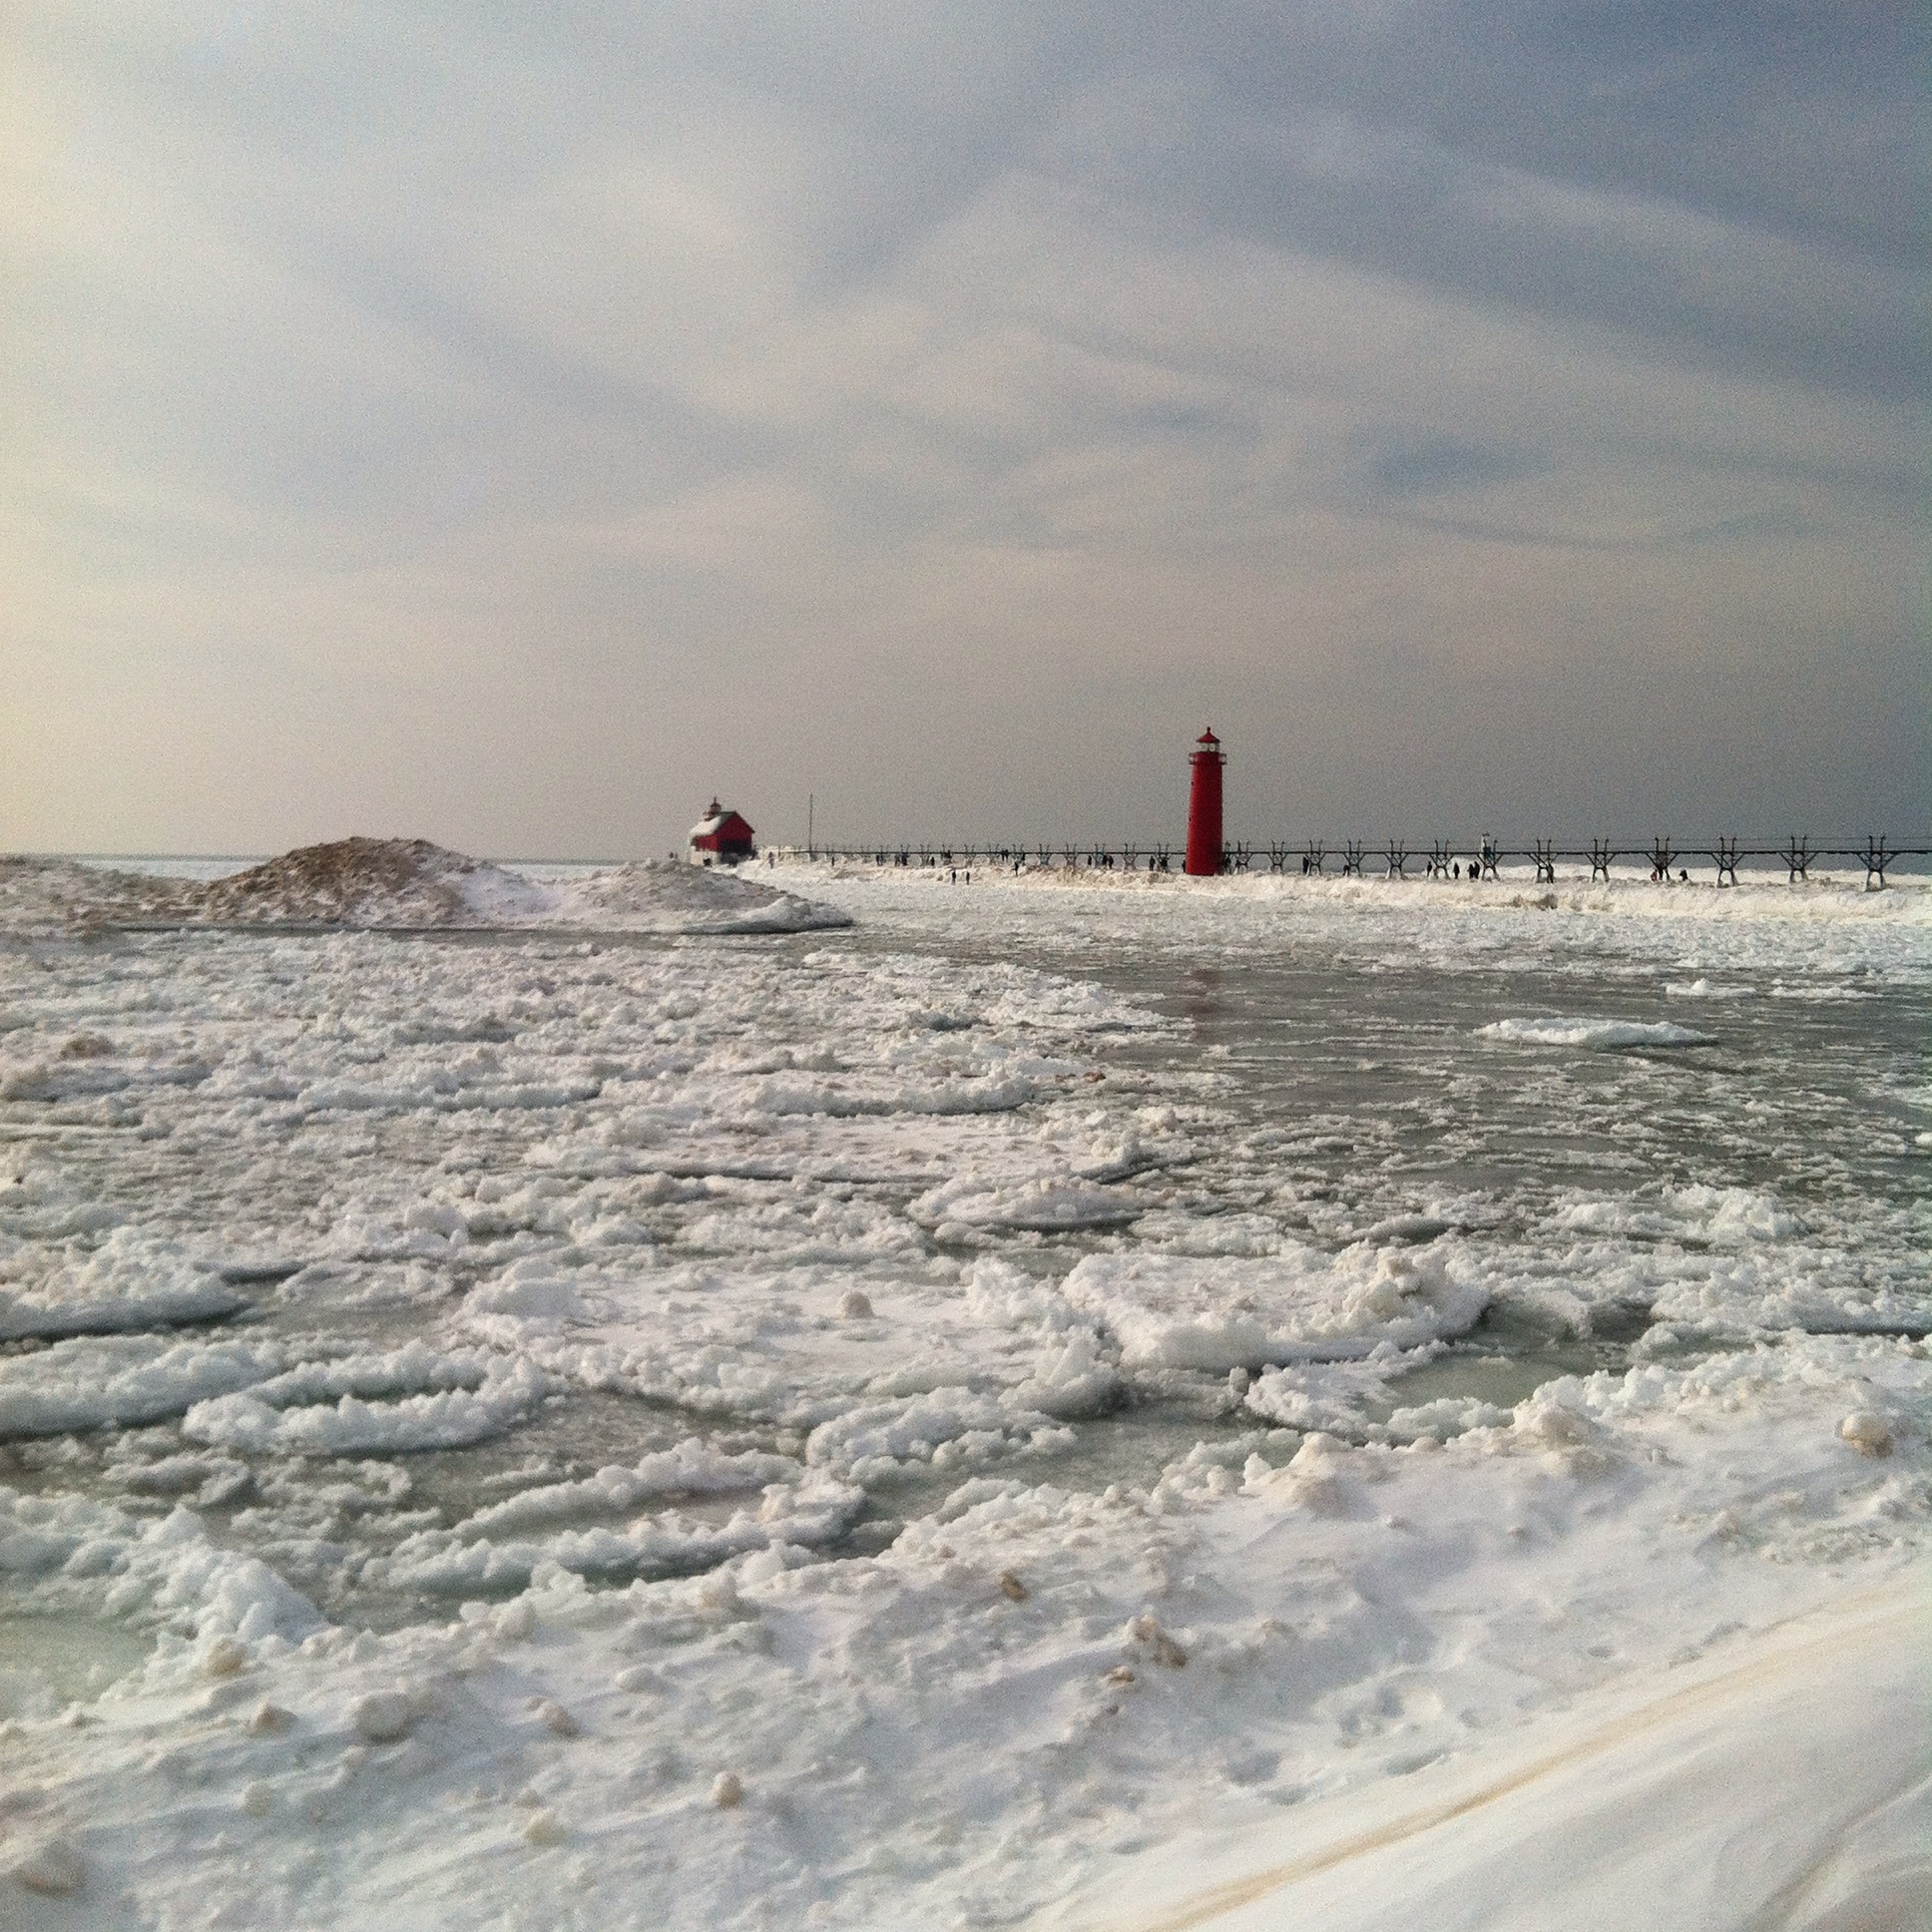 I still am amazed at how cool (no pun intended) the frozen landscape of Lake Michigan is.